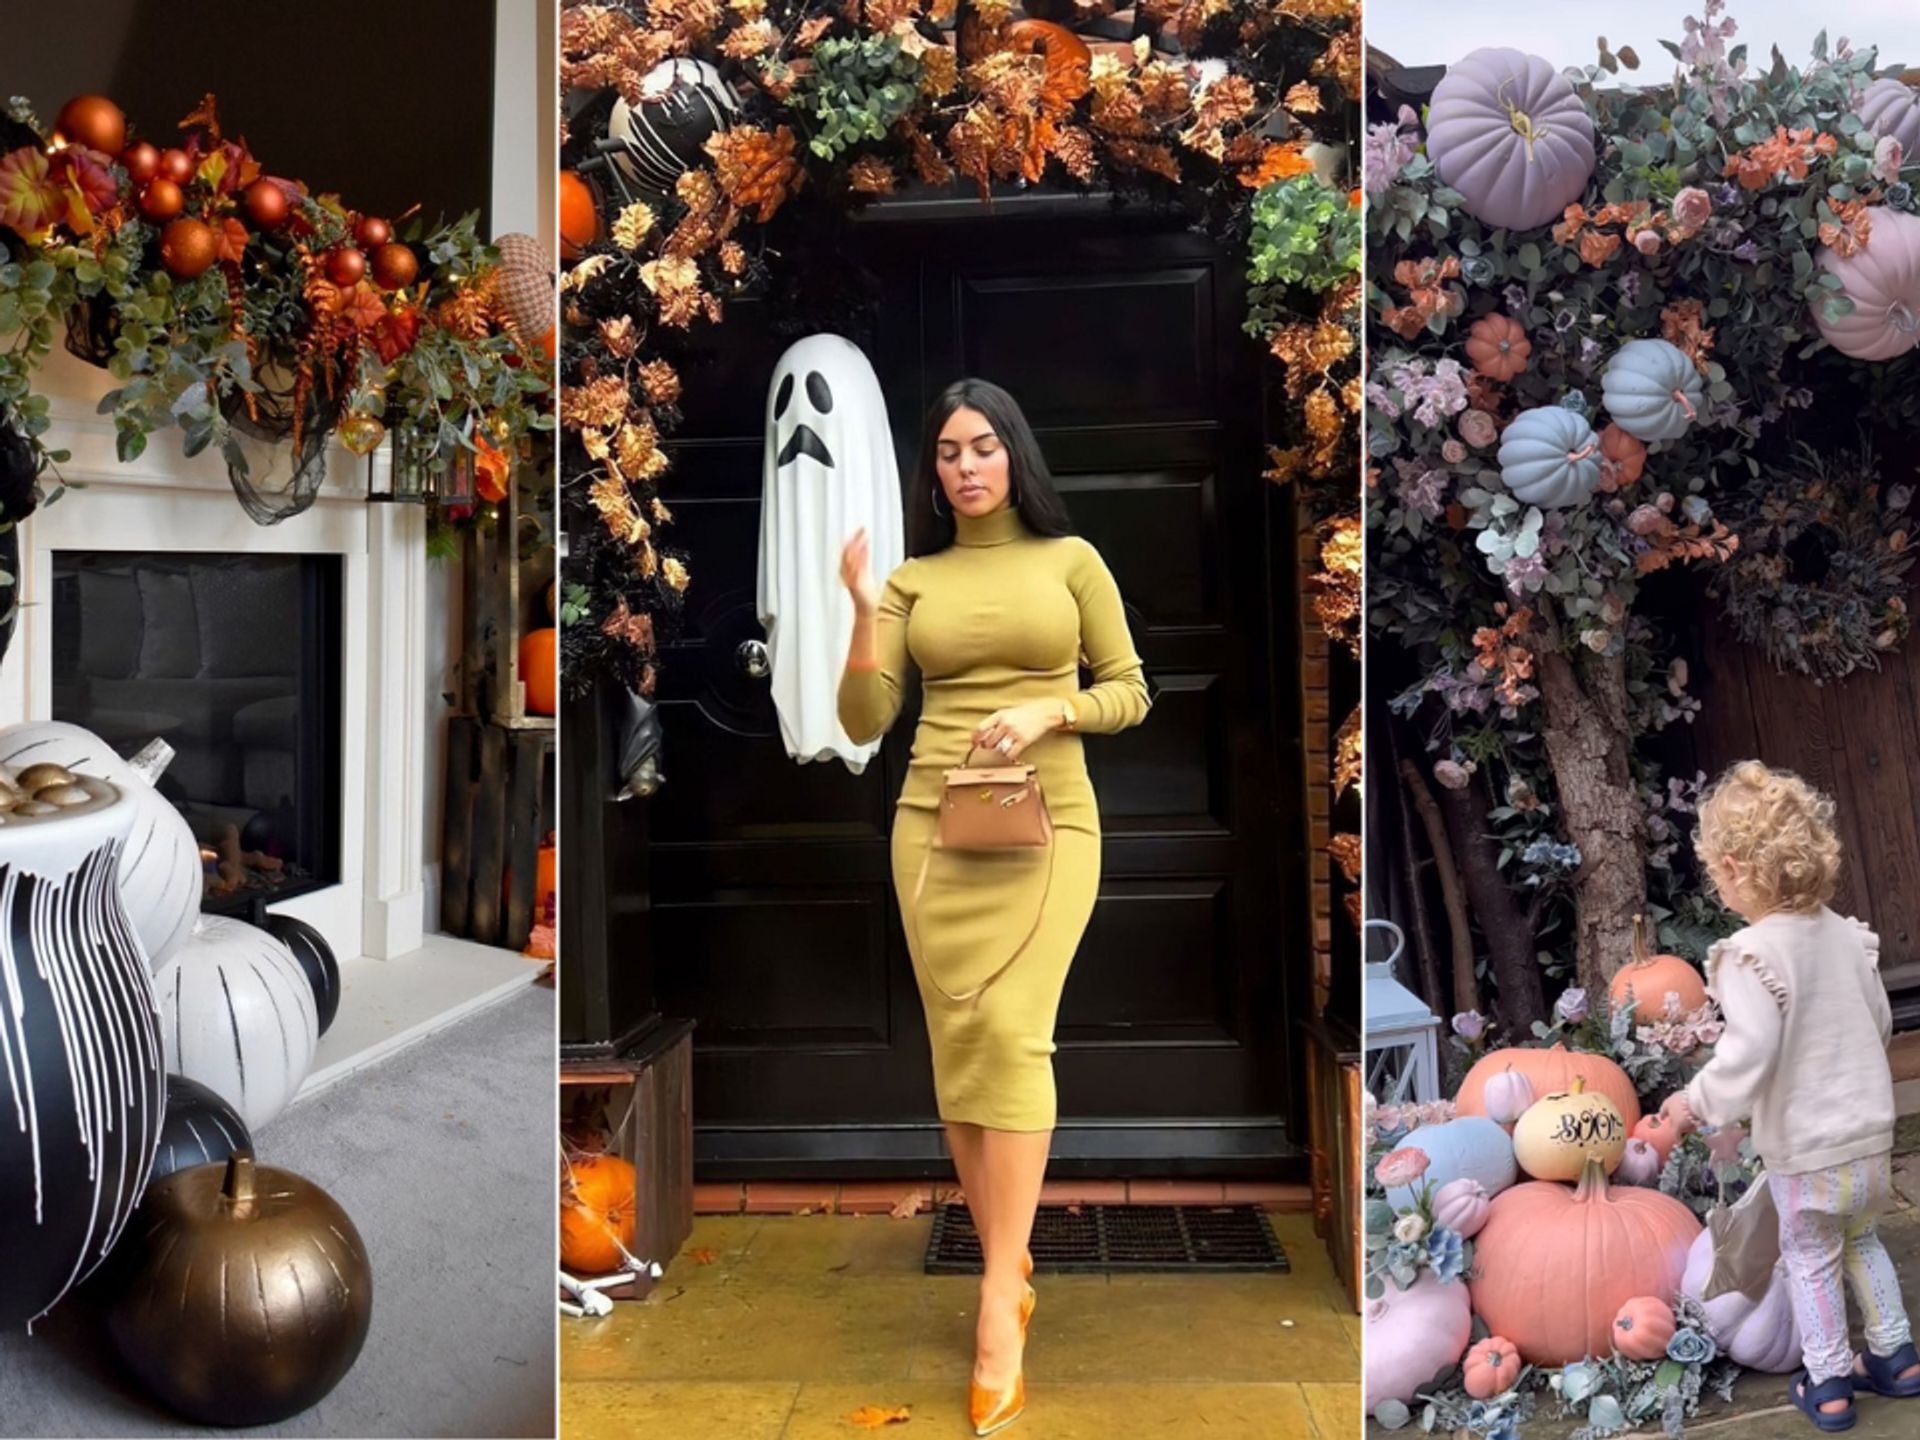 Our Favorite Halloween Decorations Spotted in the Charlotte Area -  Charlotte Magazine